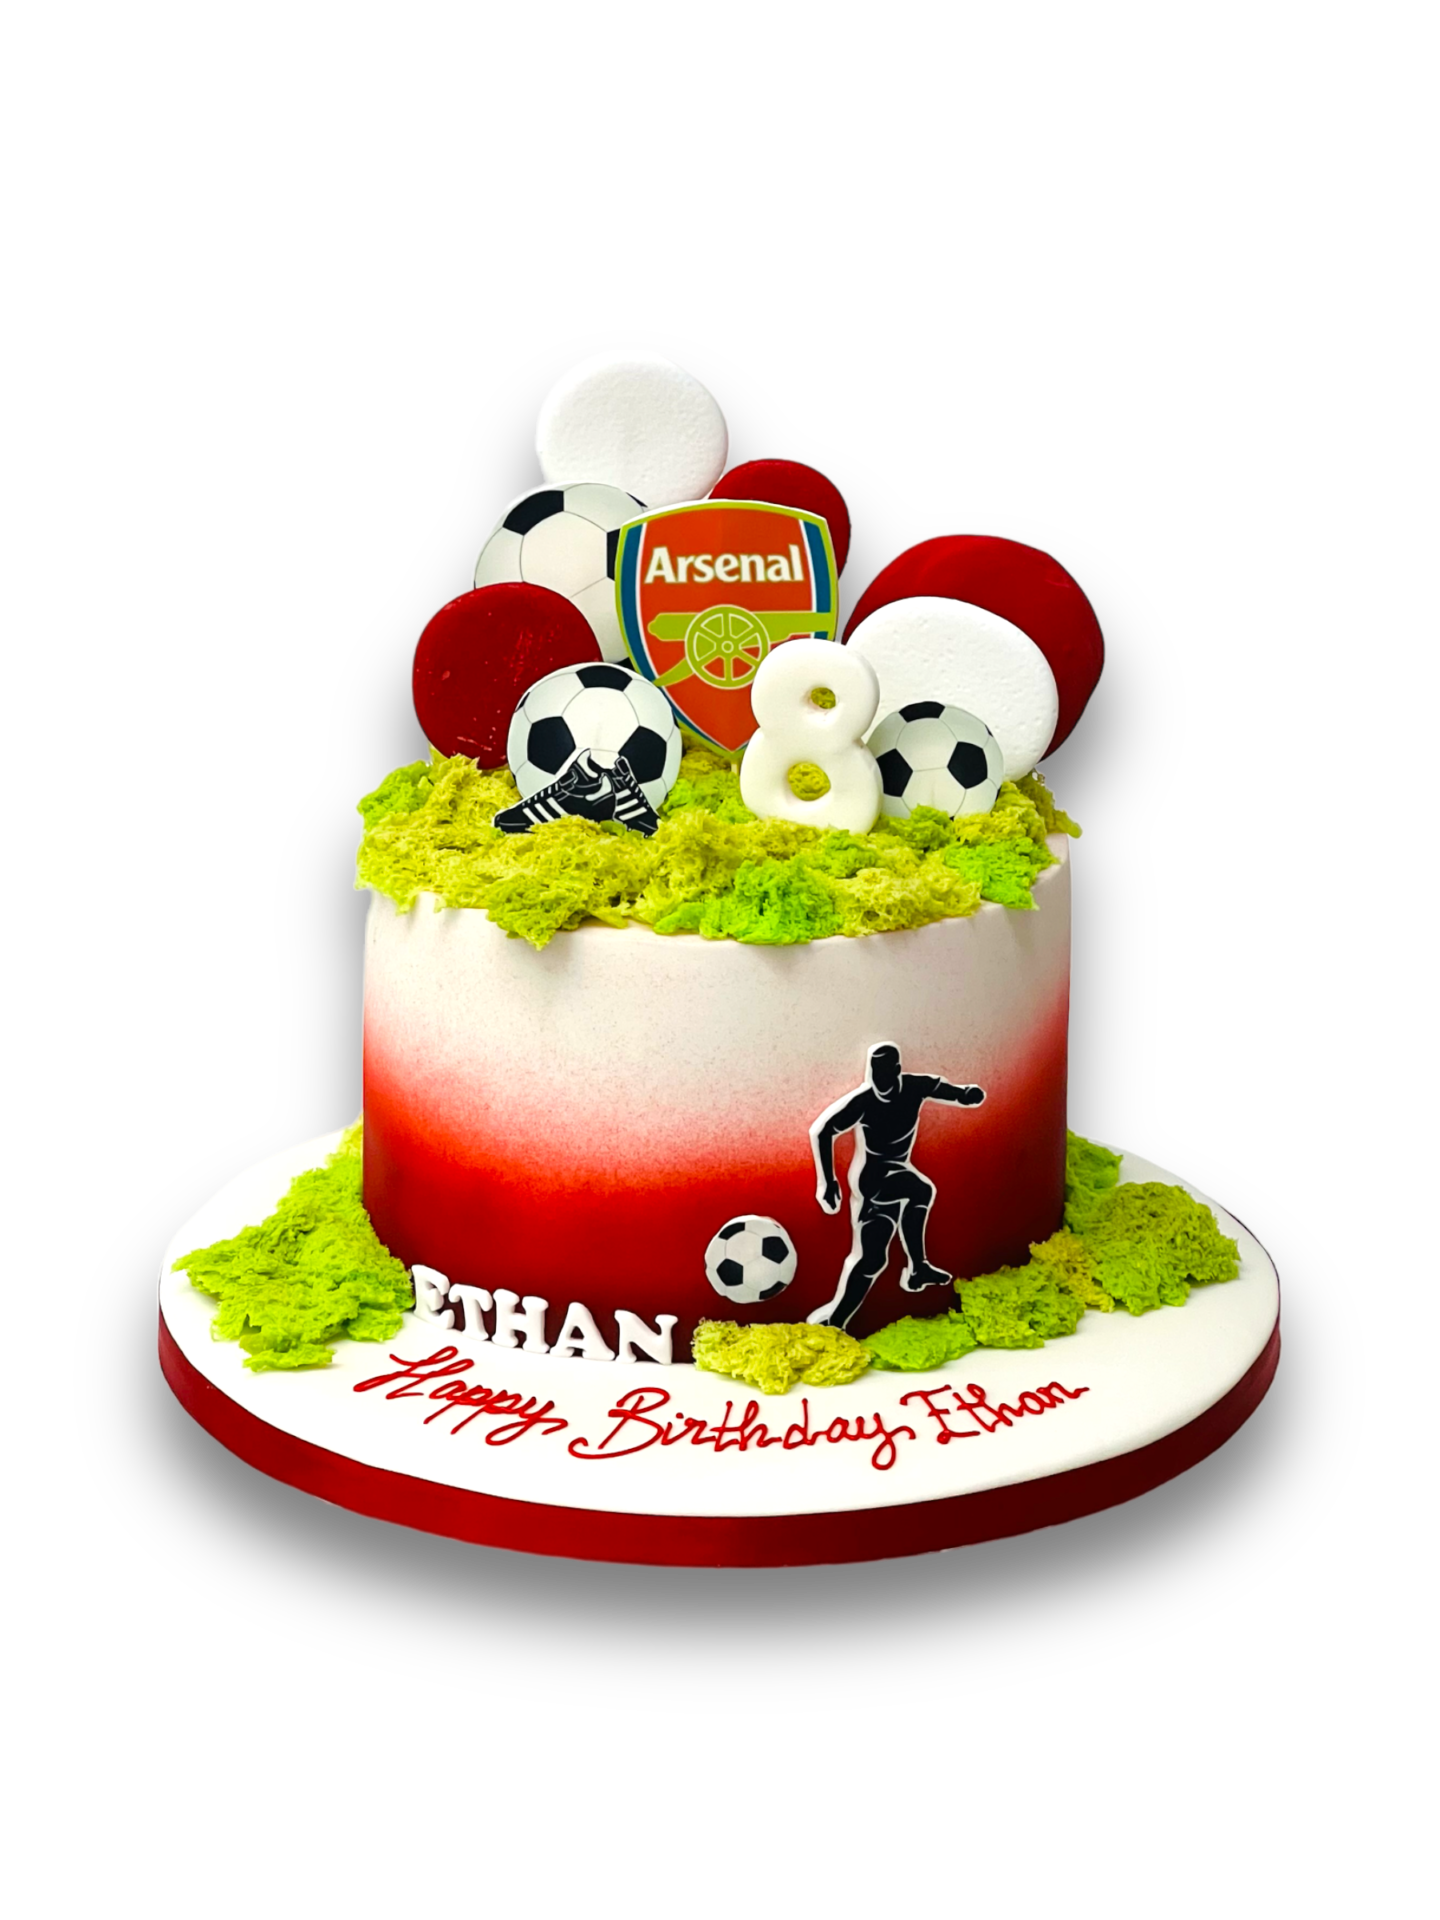 Soccer jersey / arsenal /Manchester United /Hotspur / Liverpool / adidas  theme fondant cake / cupcakes, Food & Drinks, Homemade Bakes on Carousell